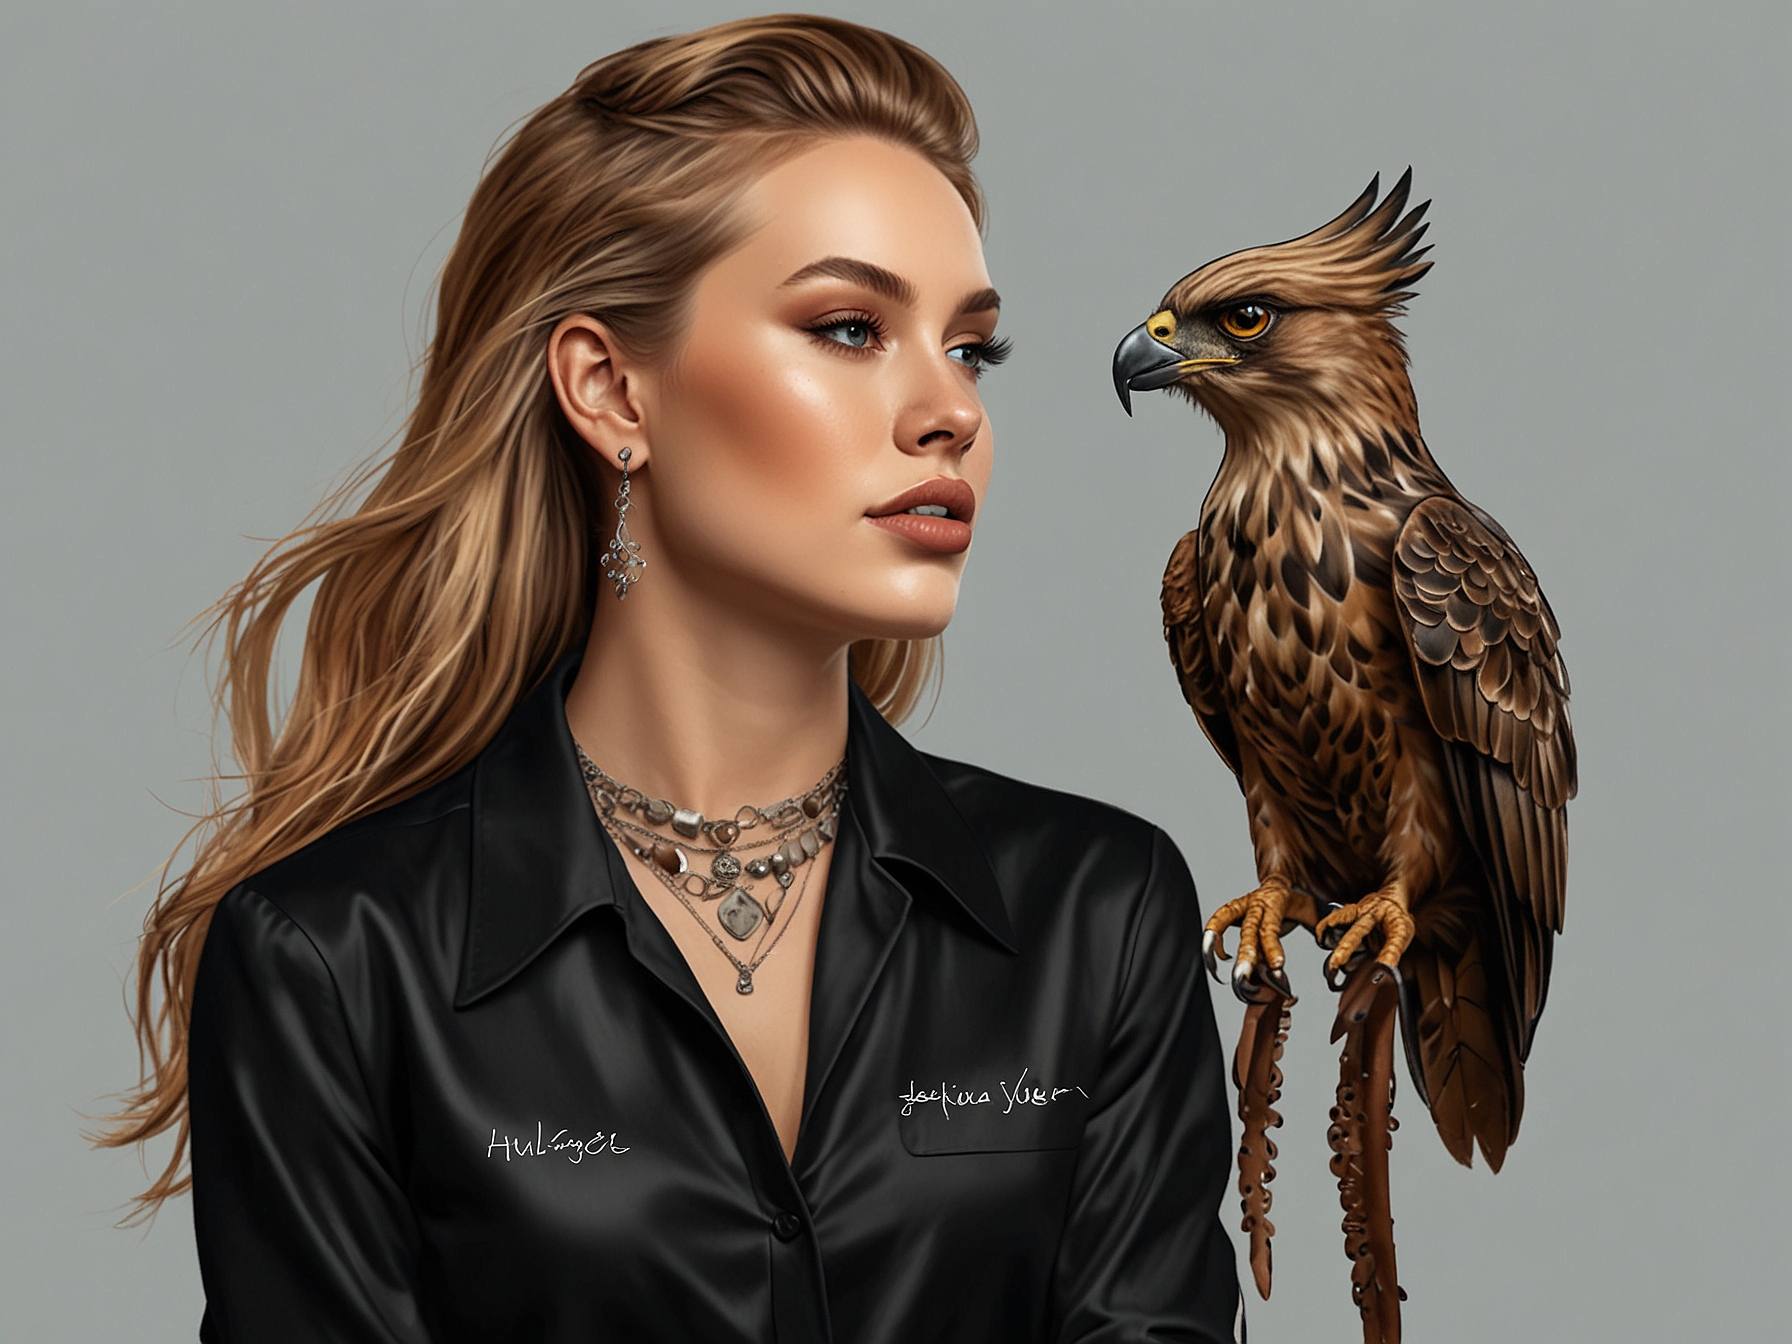 Hailey Welch, the 'Hawk Tuah Girl', showcasing her new 'Hawk Tuah' product line in a stylish photoshoot, highlighting trendy fashion and accessories that reflect her distinctive online persona.